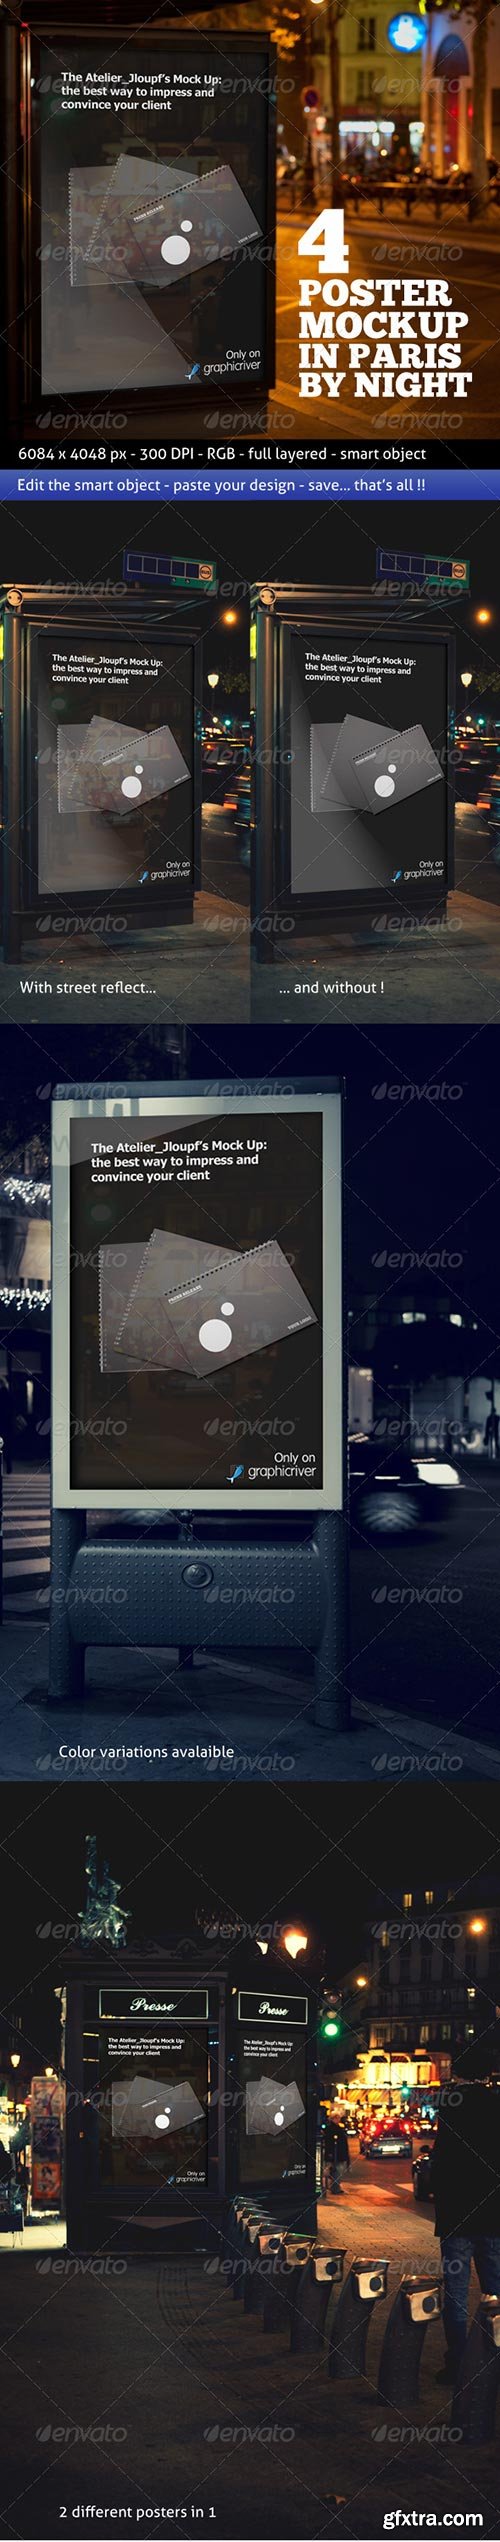 GraphicRiver - Photorealistic Poster Mockup In Paris By Night